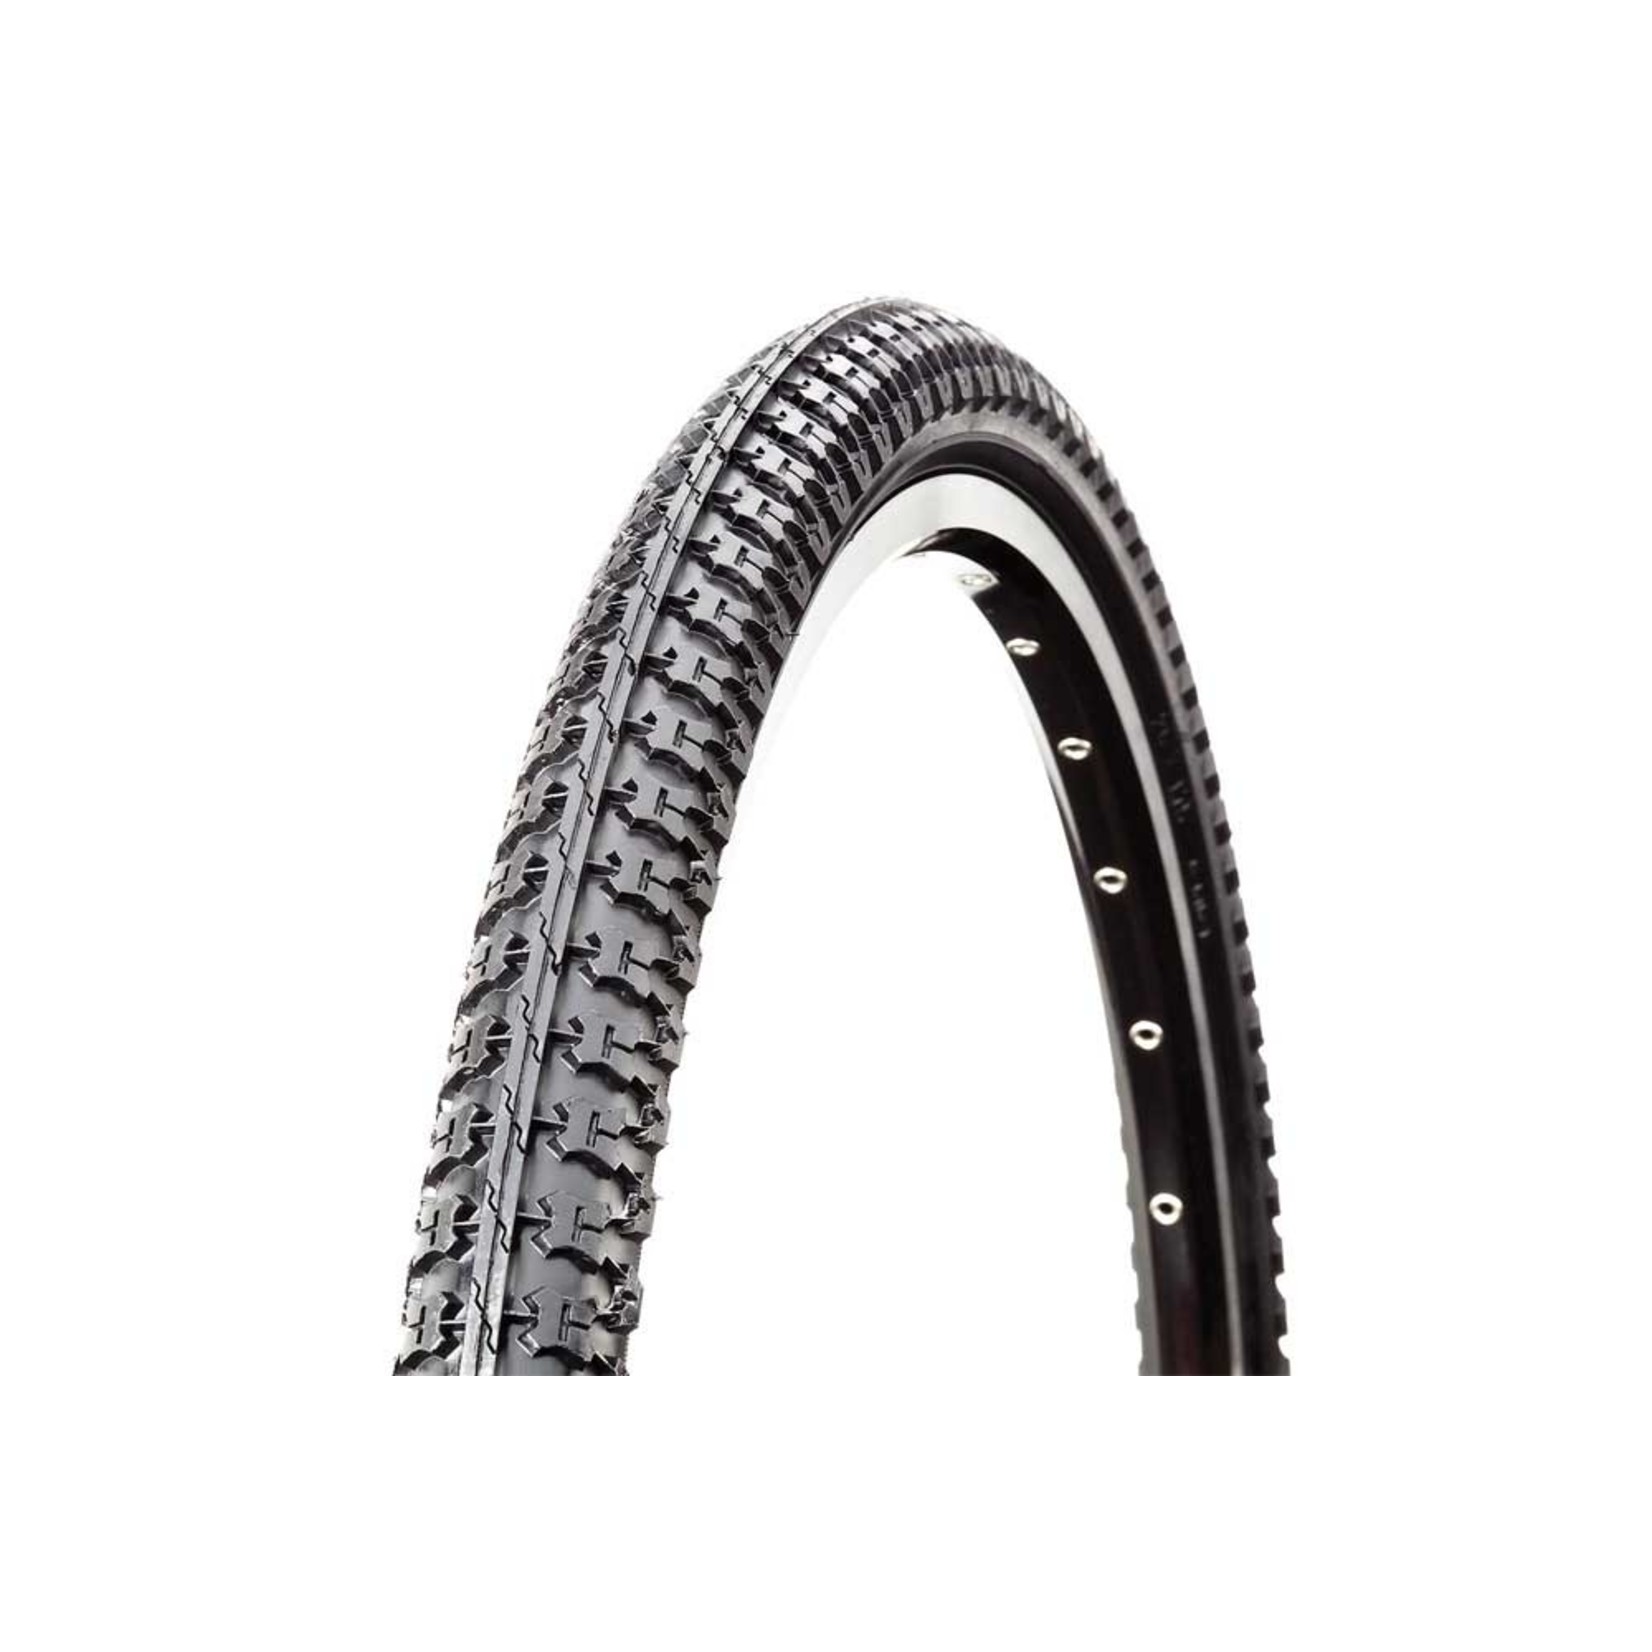 Raleigh RAISED CENTRE 26 x 1.75 Tyre